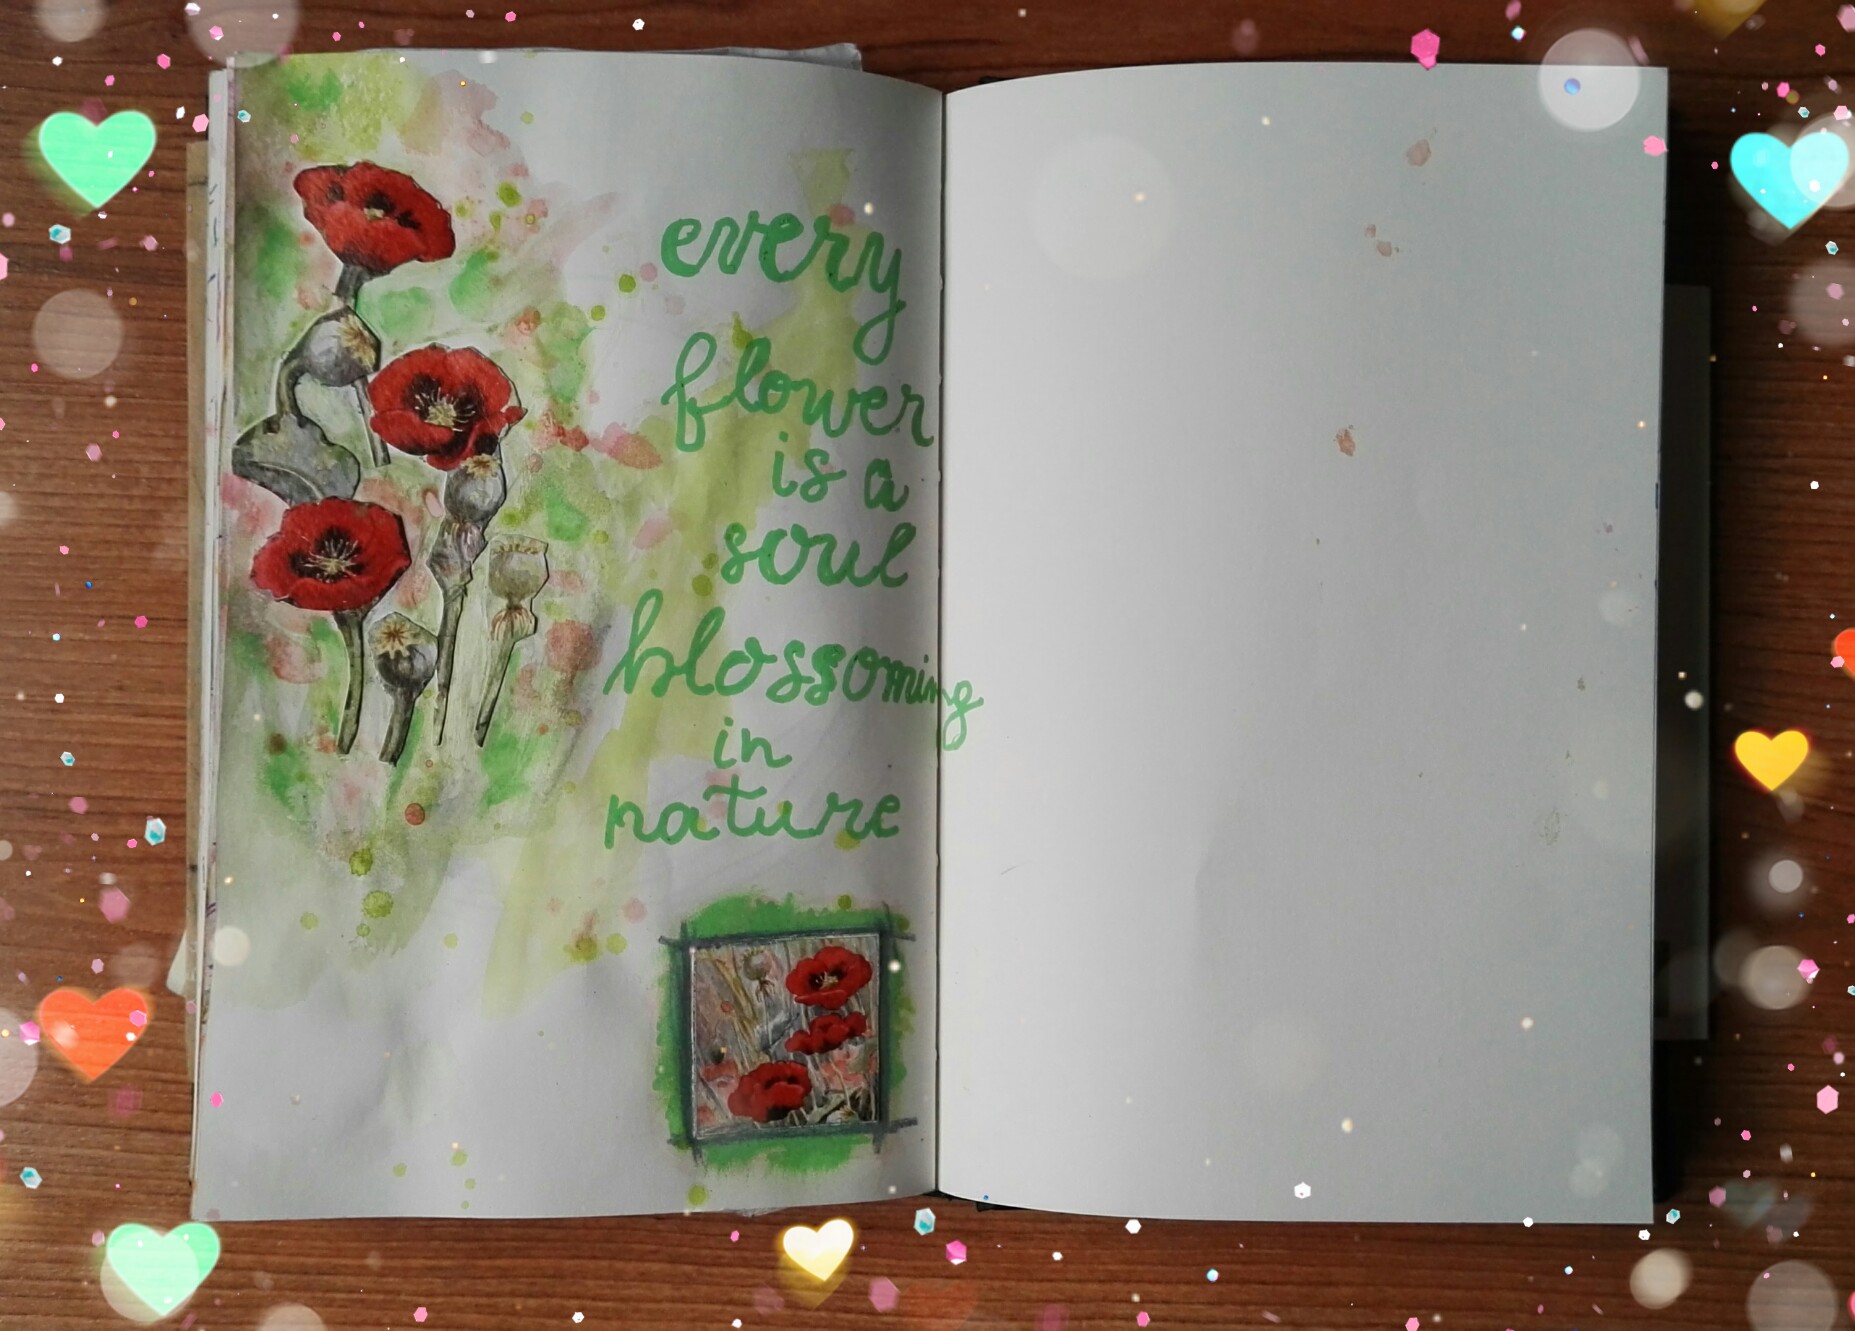 The Quoted Pages - Every flower is a soul blossoming in nature - Gerard De Nerval - by Cristina Parus @ creativemag.ro